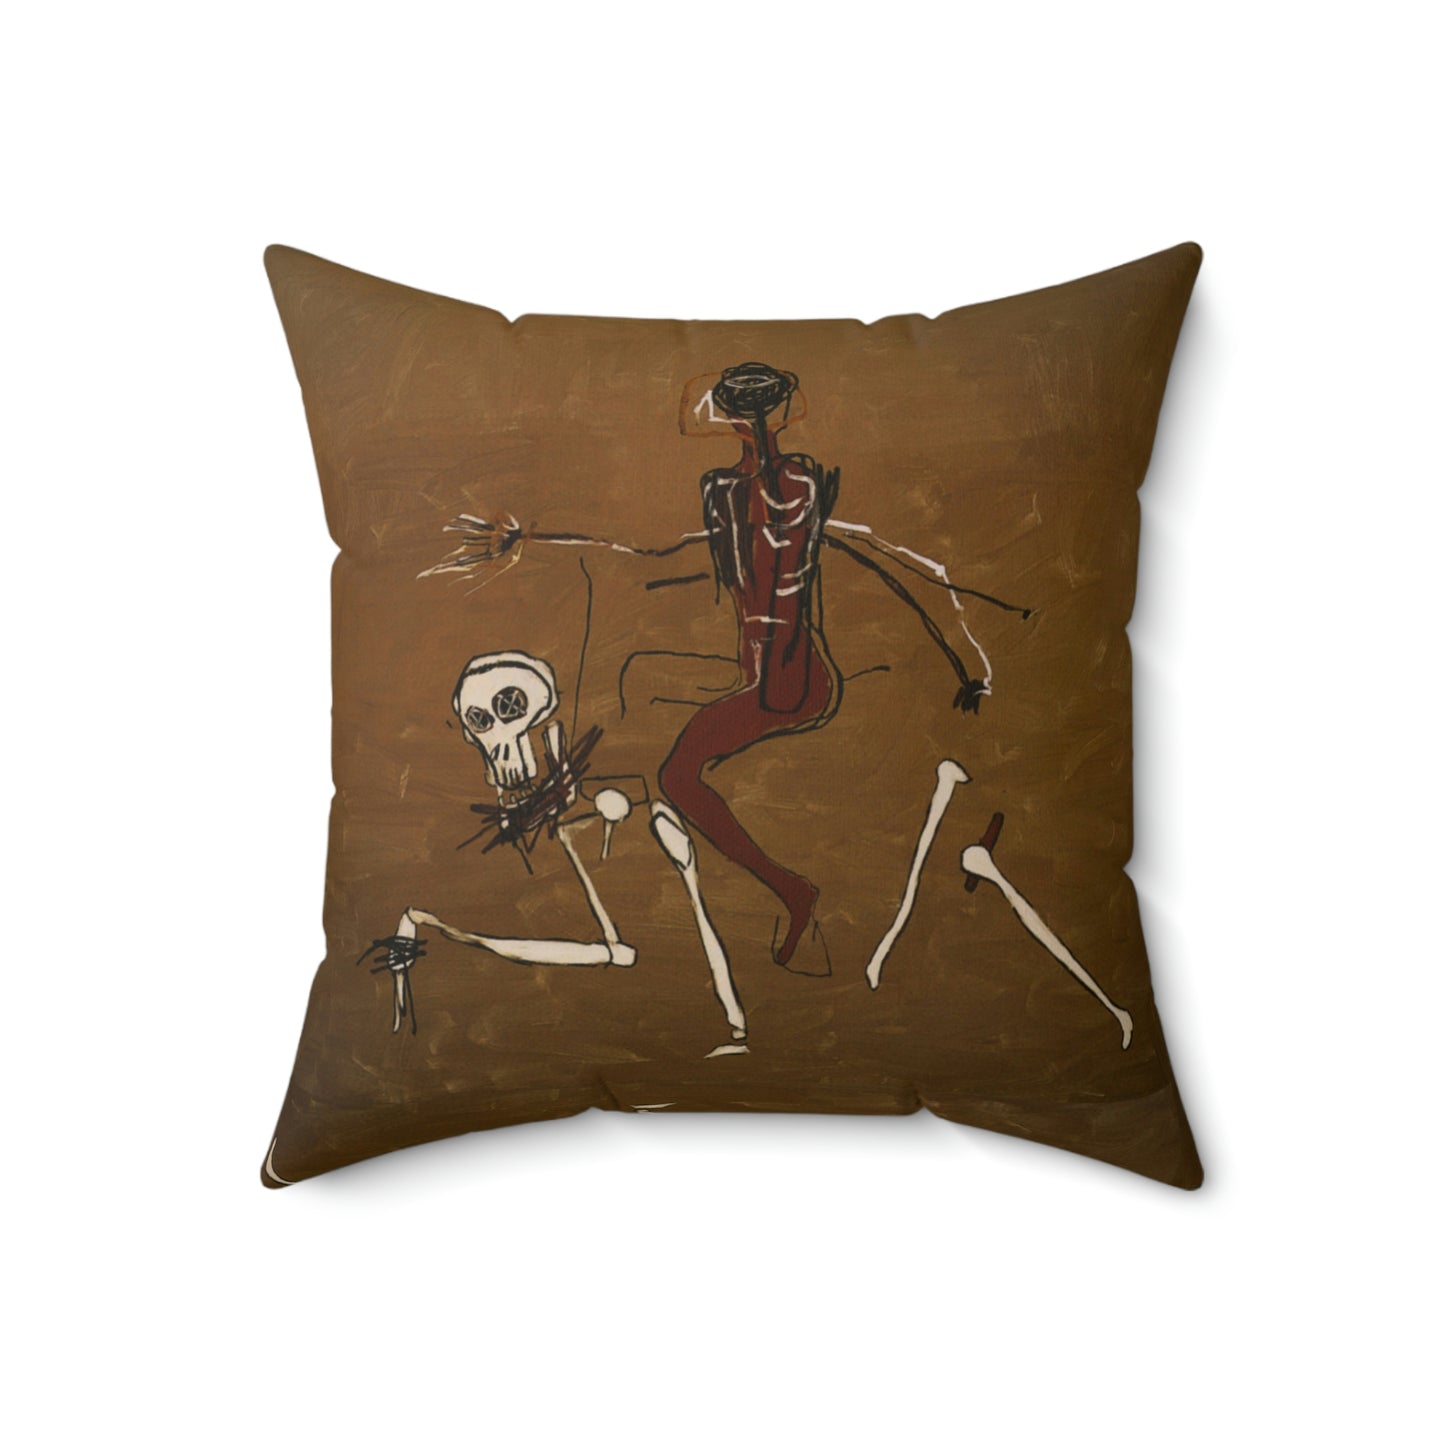 Jean-Michel Basquiat "Riding With Death" Artwork Square Throw Pillow